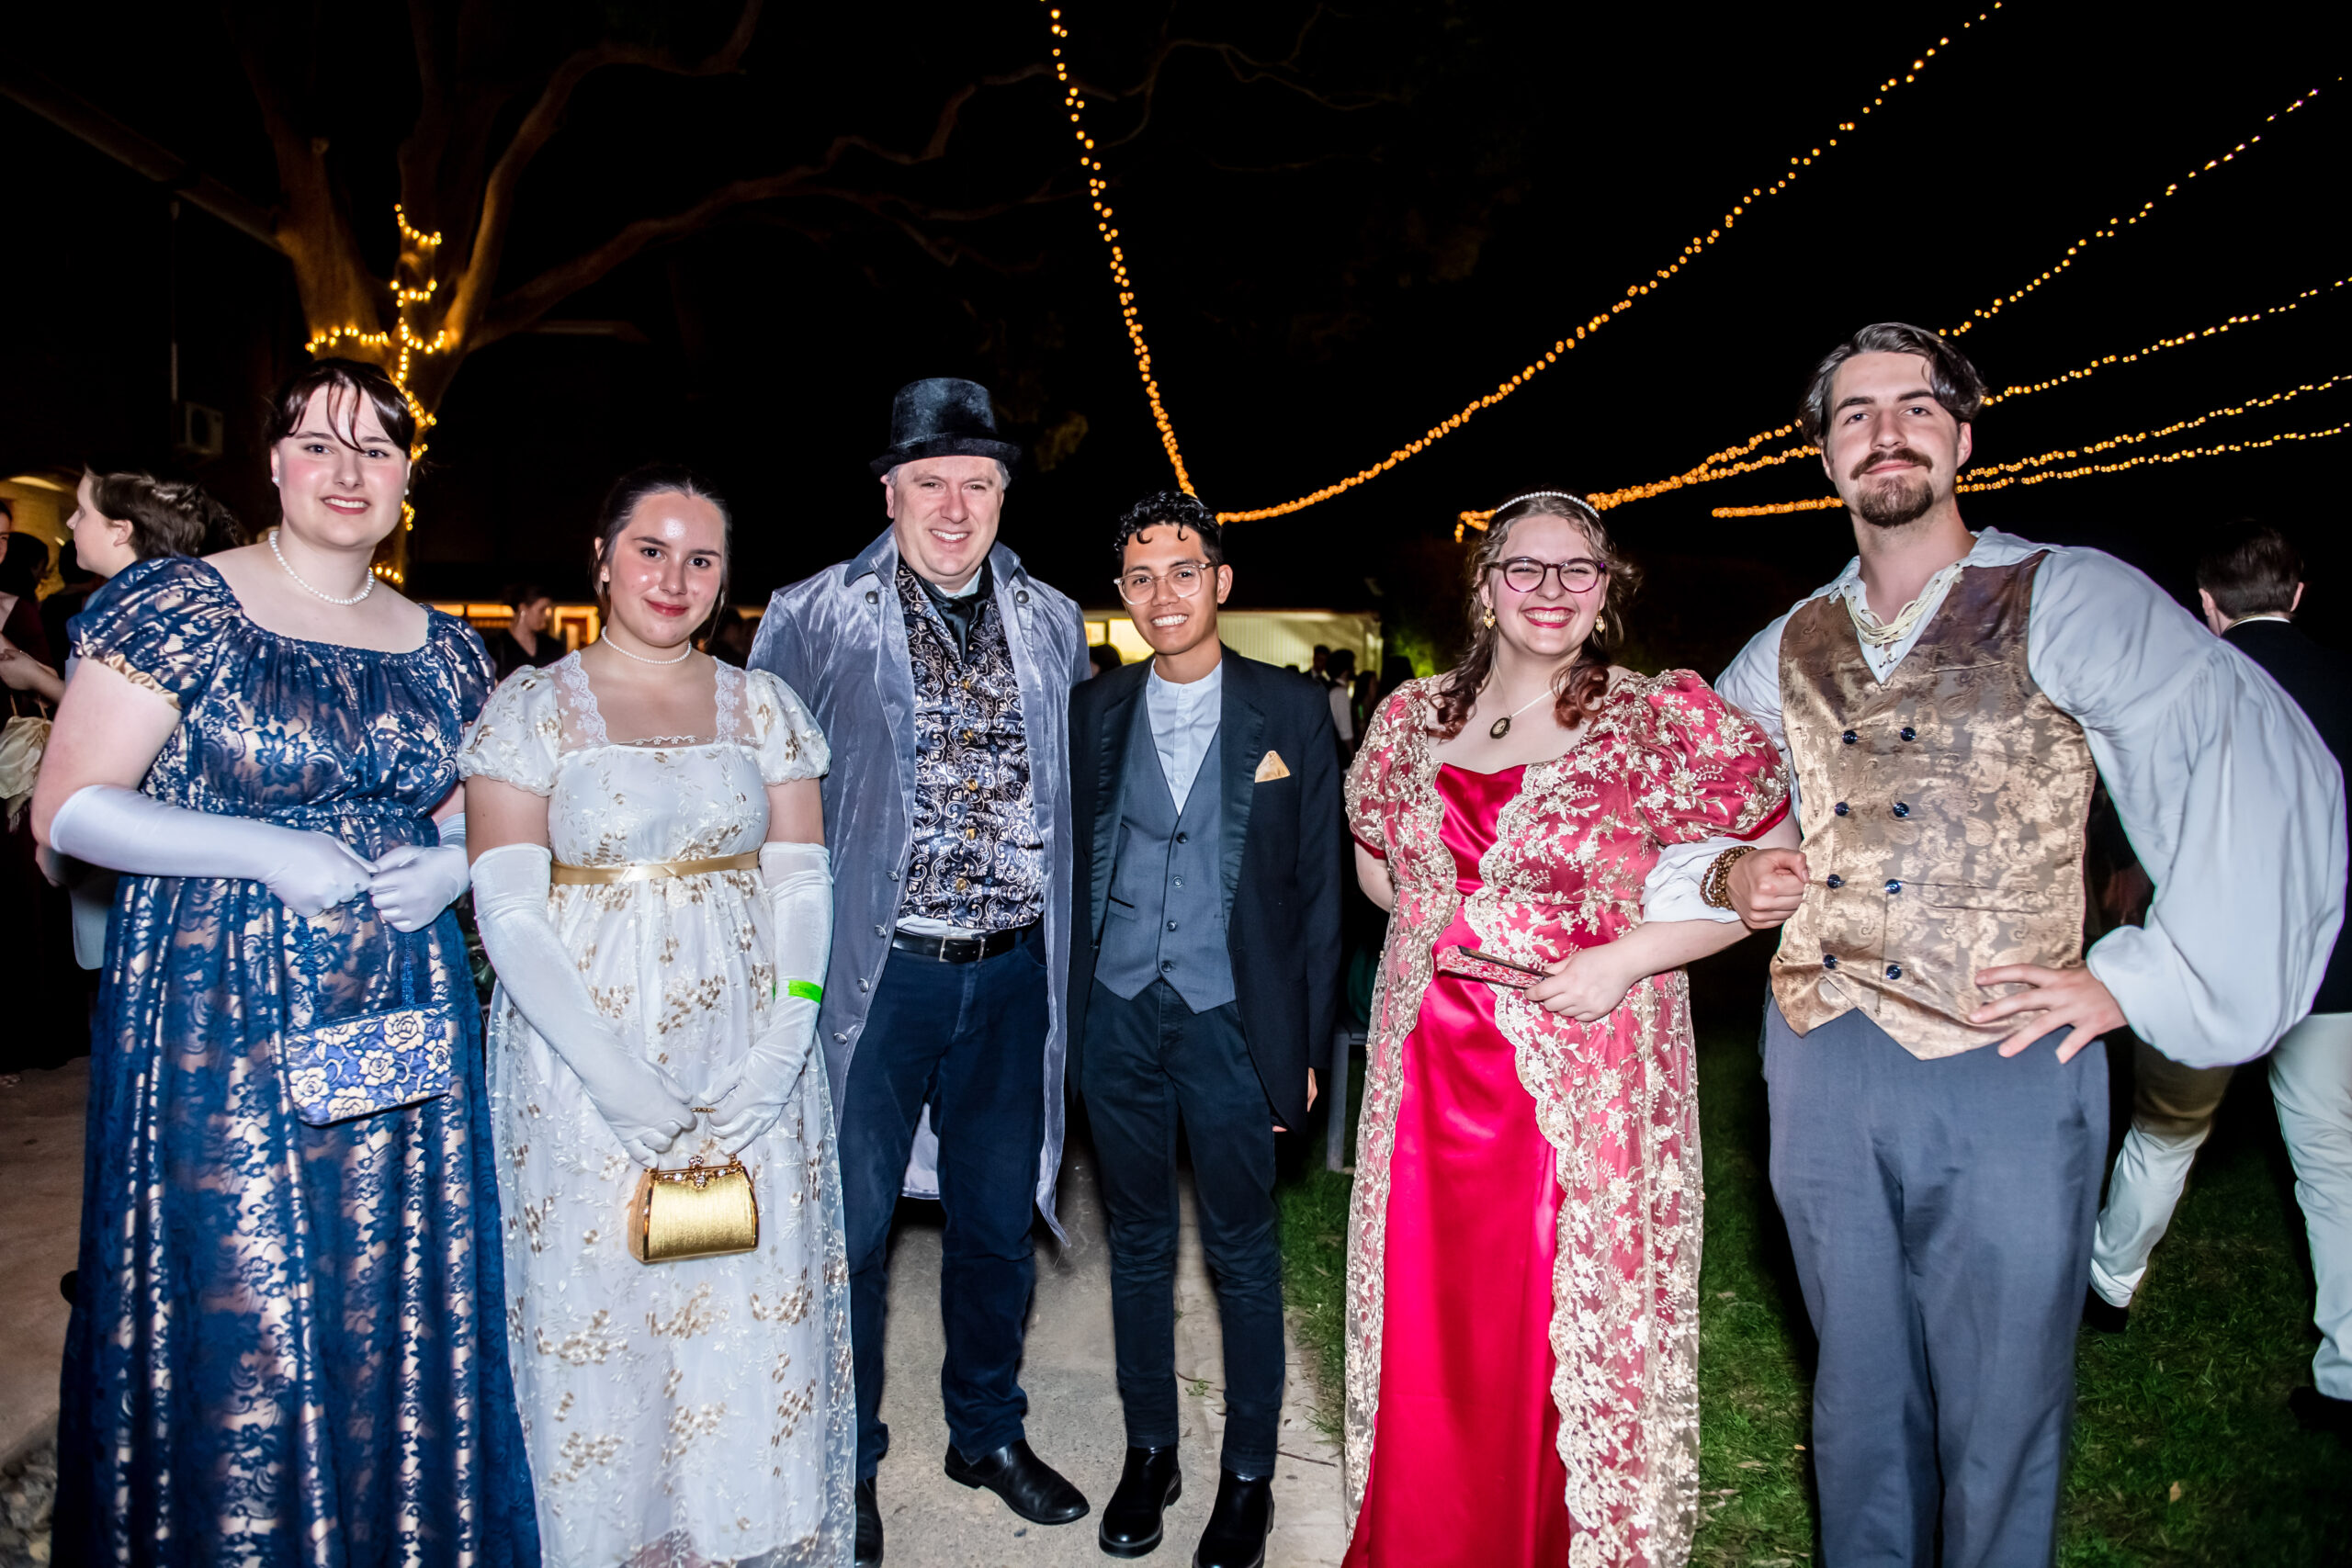 Young adults flock to Regency-themed Campion Ball